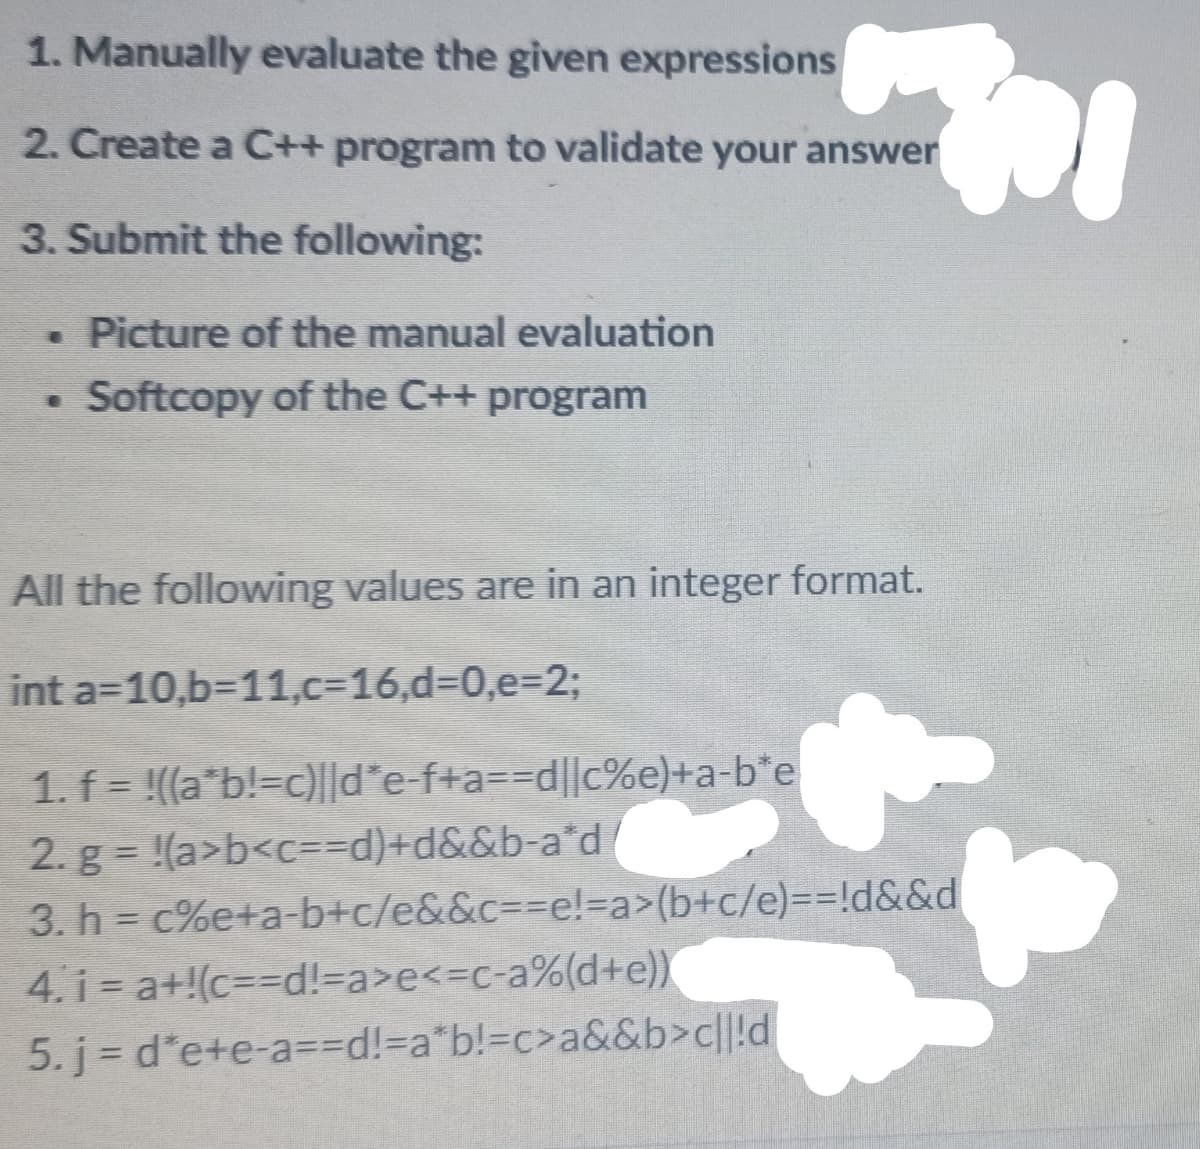 1. Manually evaluate the given expressions
2. Create a C++ program to validate your answer
3. Submit the following:
. Picture of the manual evaluation
• Softcopy of the C++ program
All the following values are in an integer format.
int a=10,b311,c=16,d=0,e=2;
1. f = !((a*b!=c)l|d*e-f+a3D%3Dd||c%e)+a-b*e
2. g = !(a>b<c=3Dd)+d&&b-a*d
3. h = c%e+a-b+c/e&&c3D%3De!=Da>(b+c/e)%3D%3D!d&&d
4. i = a+!(c=D%3Dd!=a>e<3Dc-a%(d+e))
5. j d*e+e-a==Dd!%3Da*b!%3Dc>a&&b>c||!d
